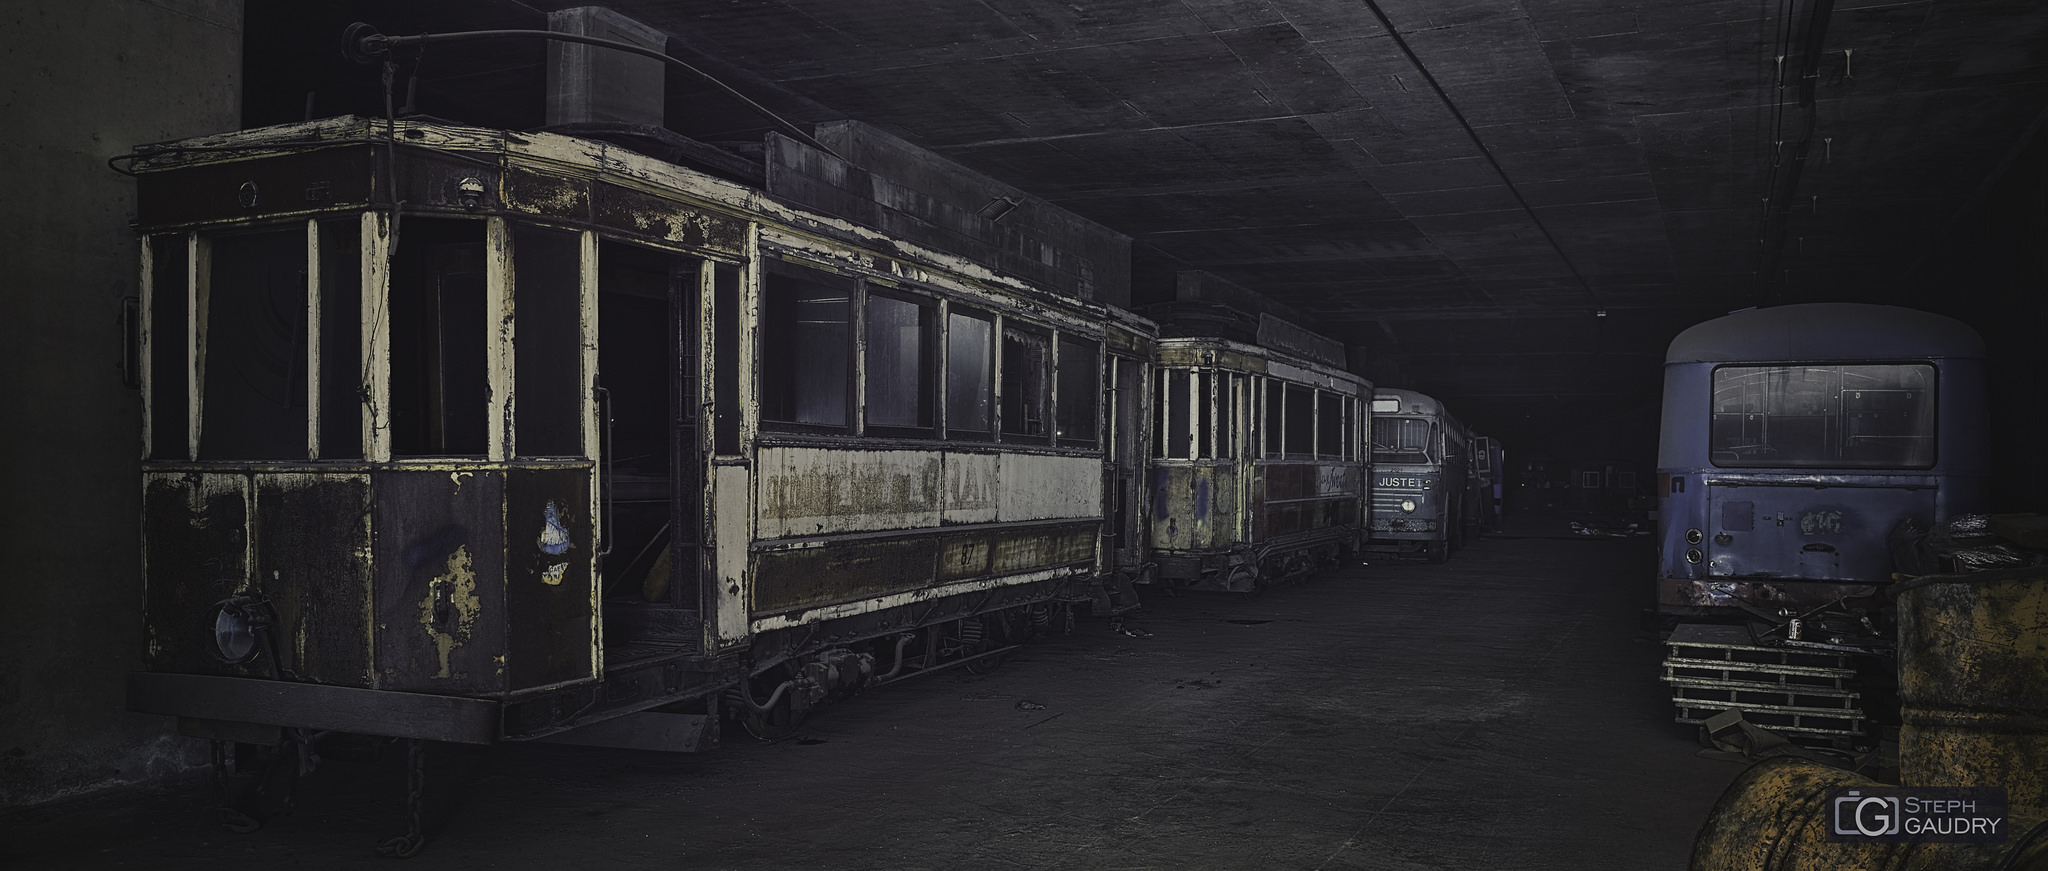 The abandoned streetcars [Click to start slideshow]